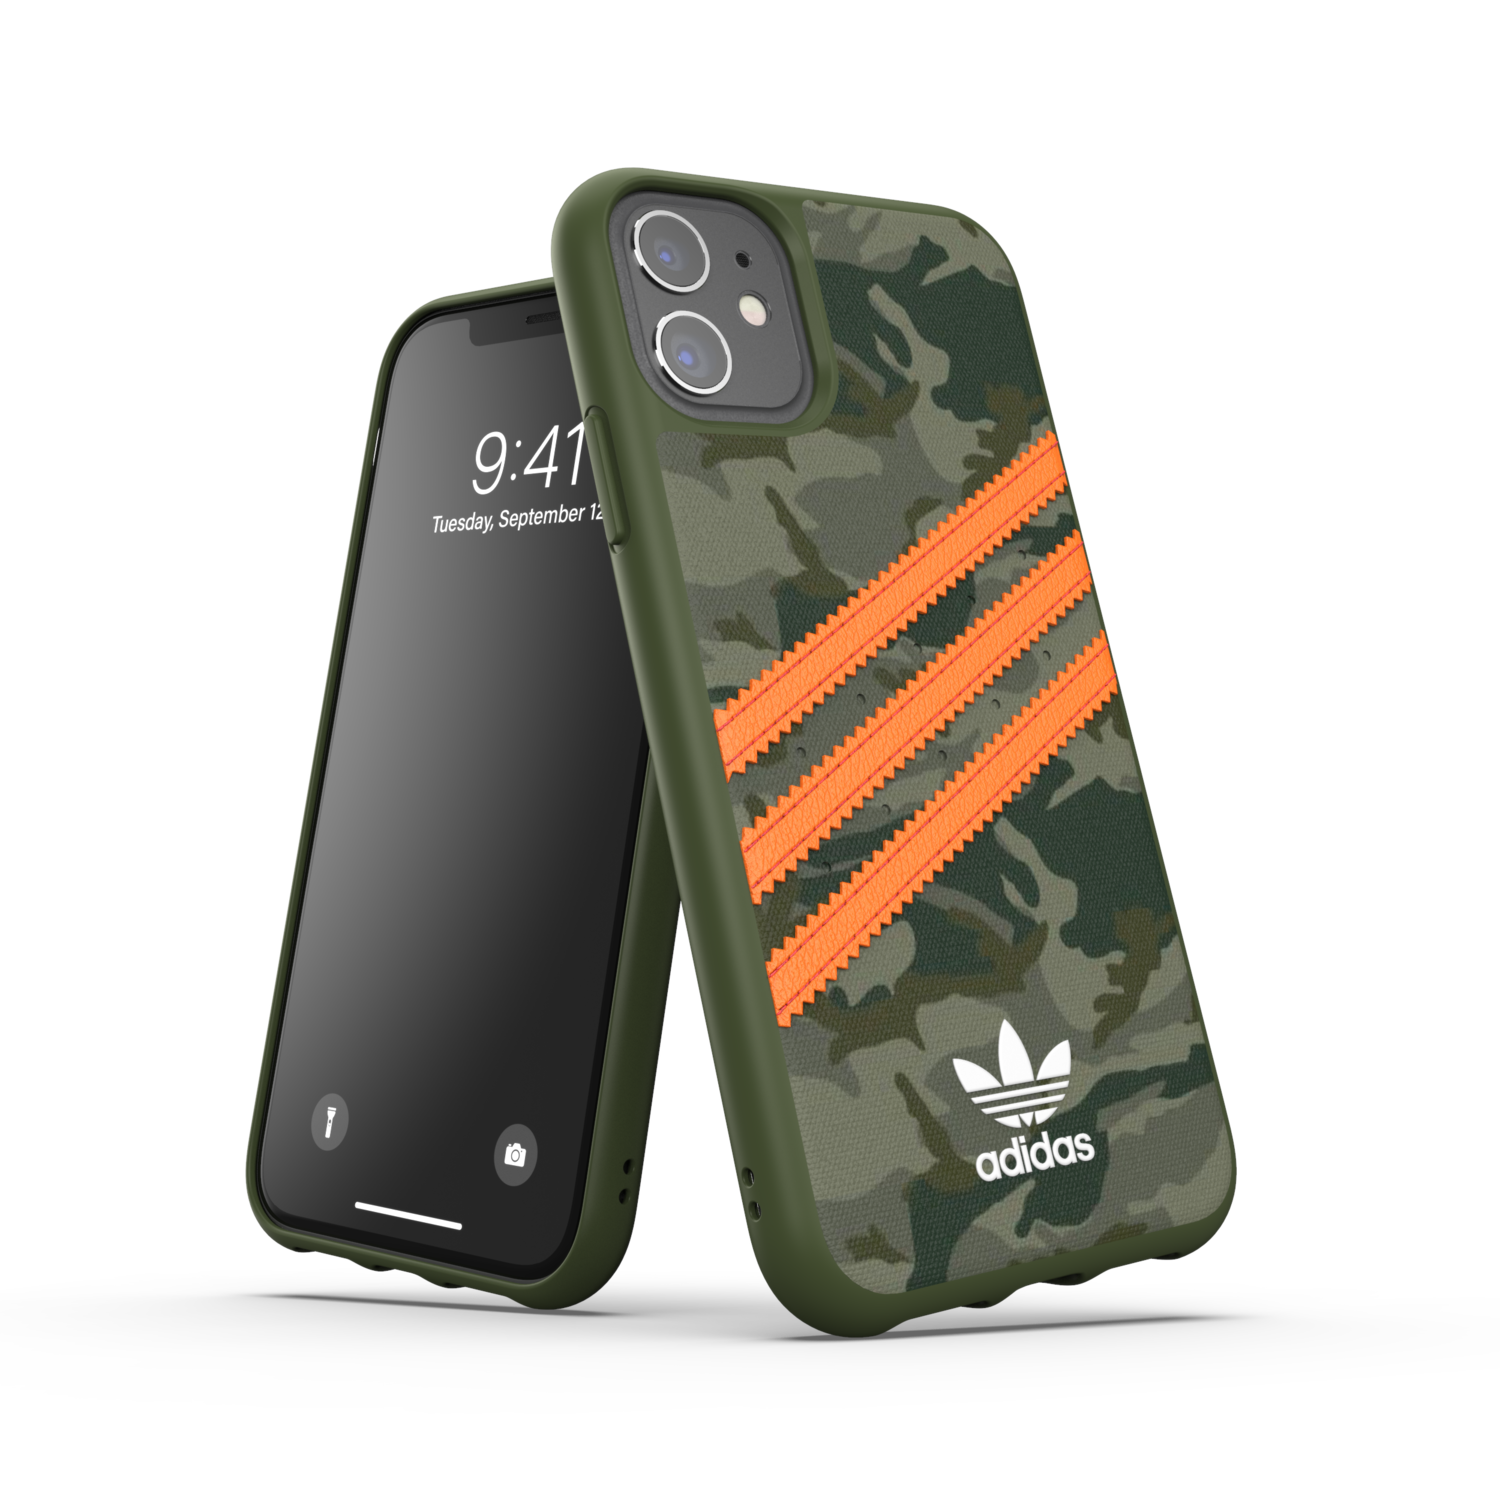 adidas OR Moulded Case PU FW20/SS21 for iPhone 11 camo patteren/signal orange